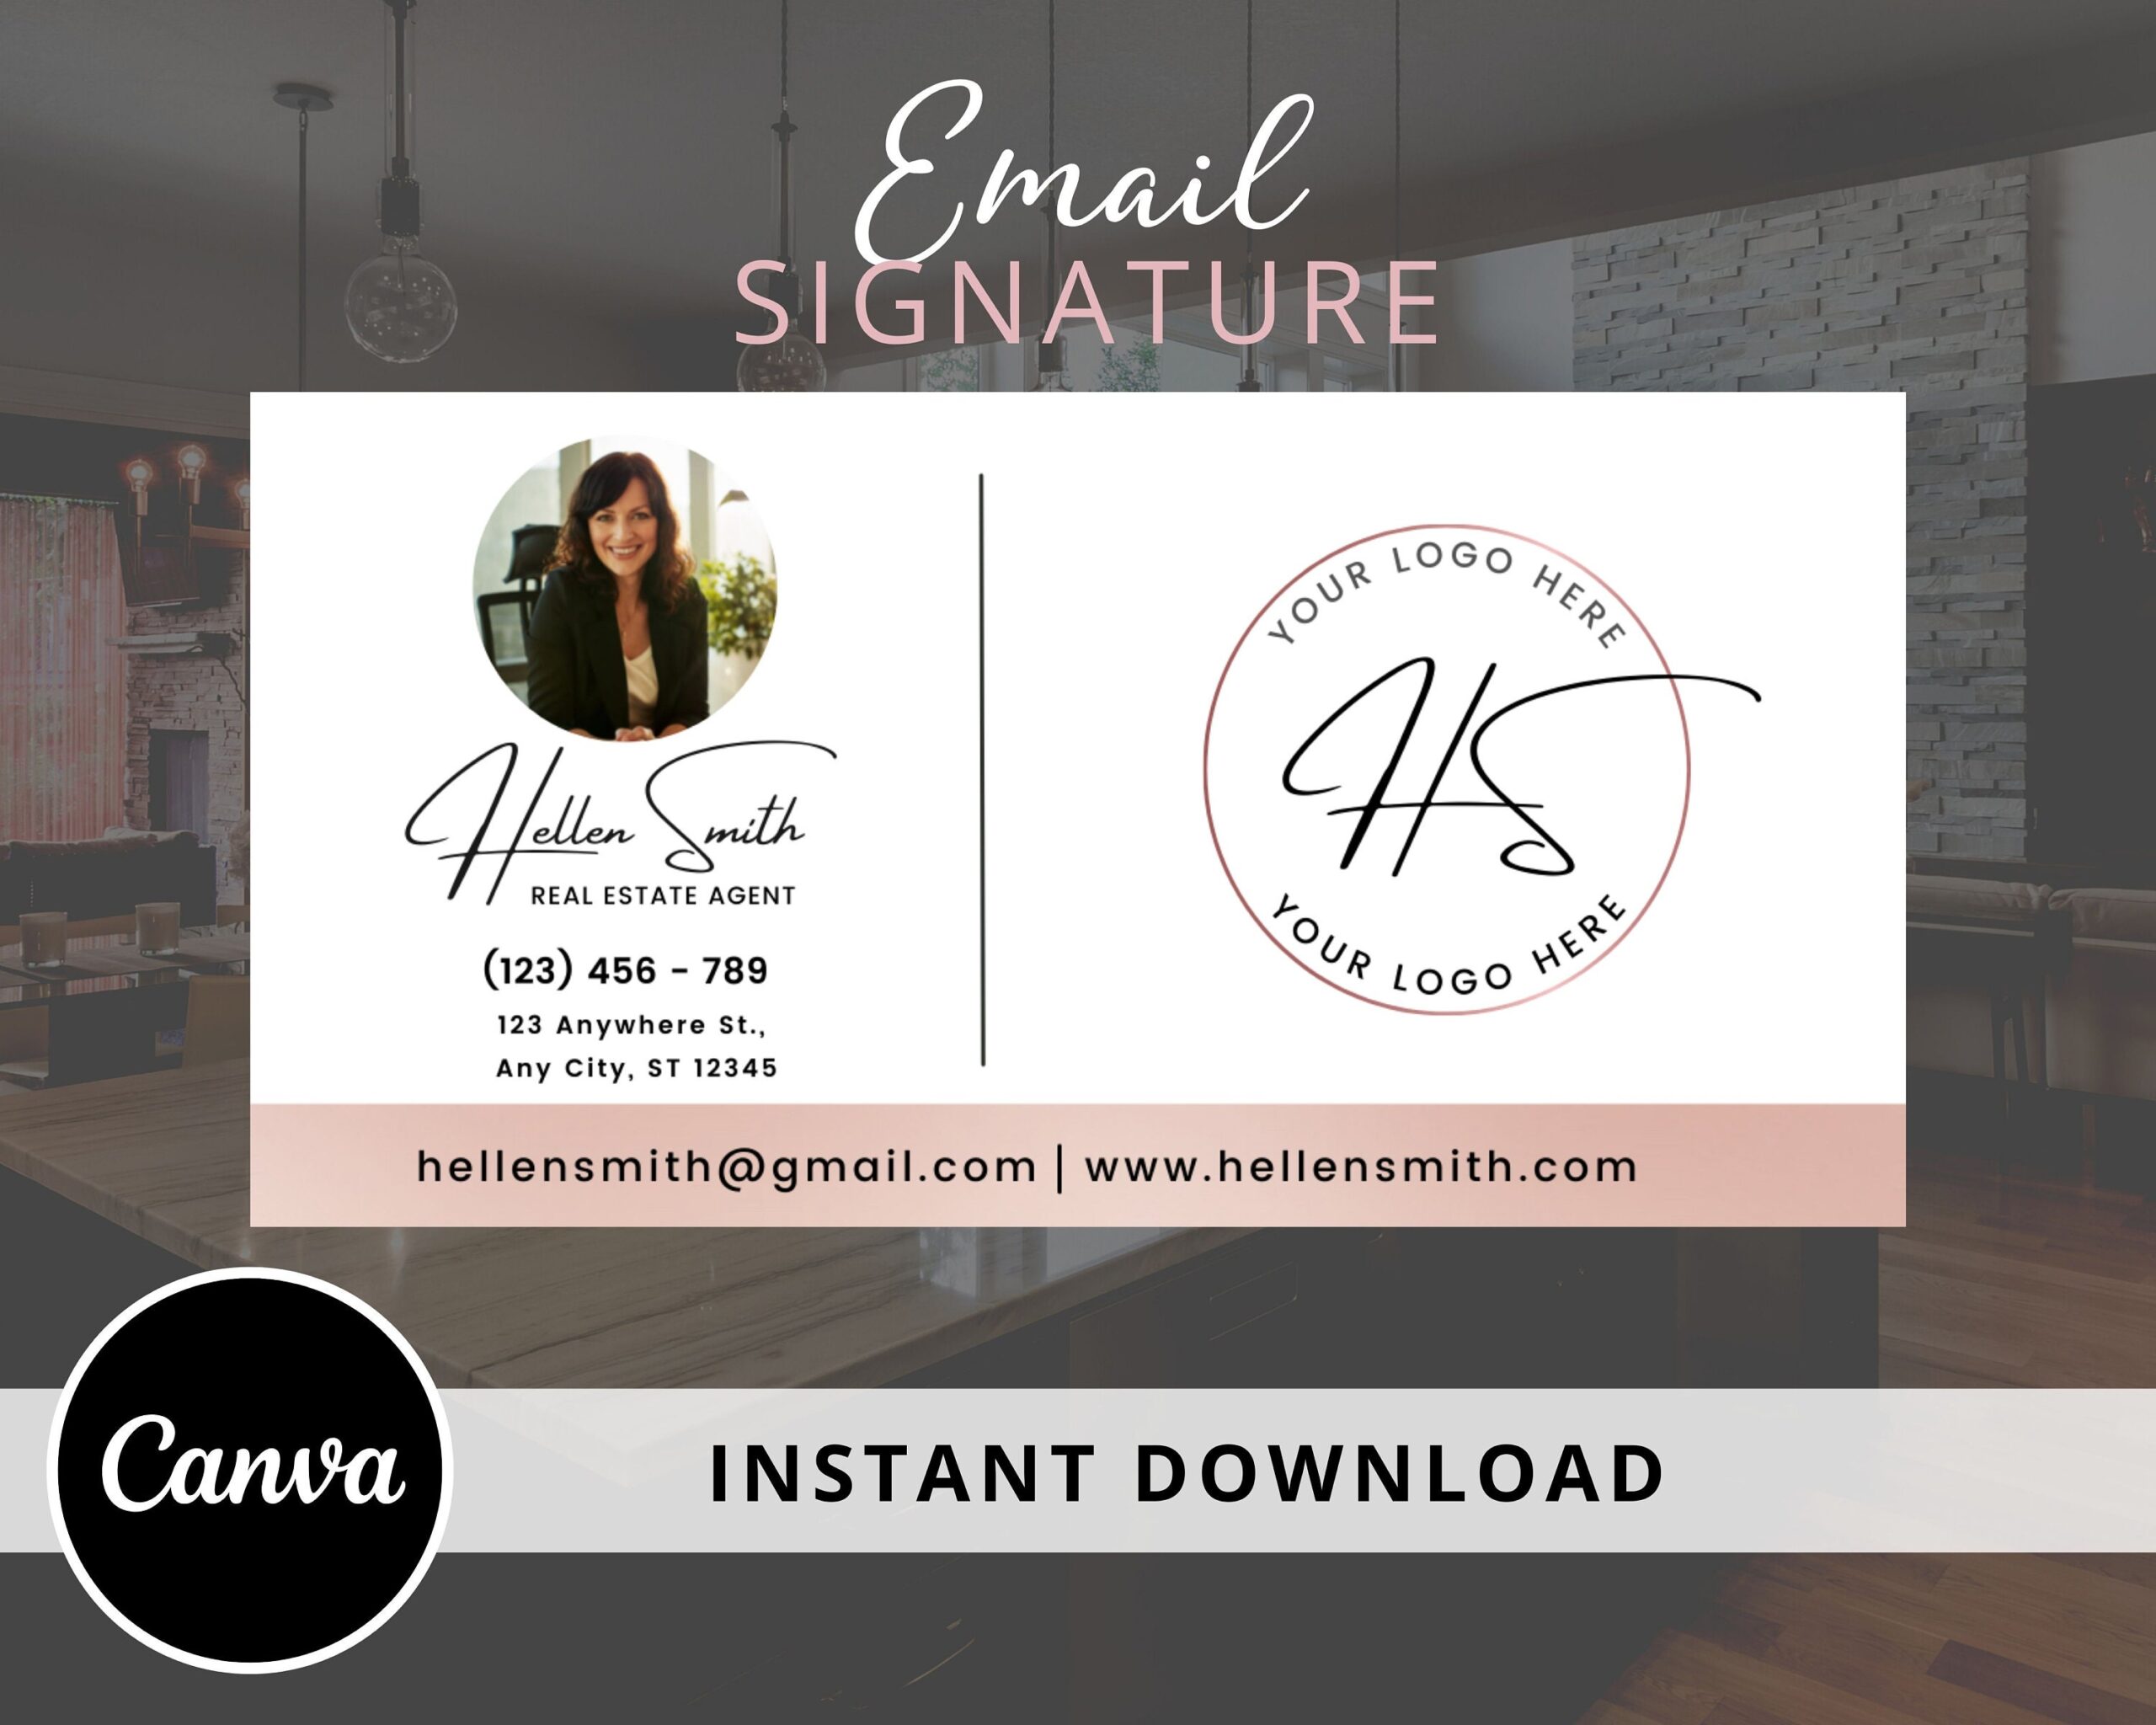 Email Signature Editable Canva Template -  Rose Gold Gmail Design Footer -  Photographer Template Design - Instant Download - Picture Signature